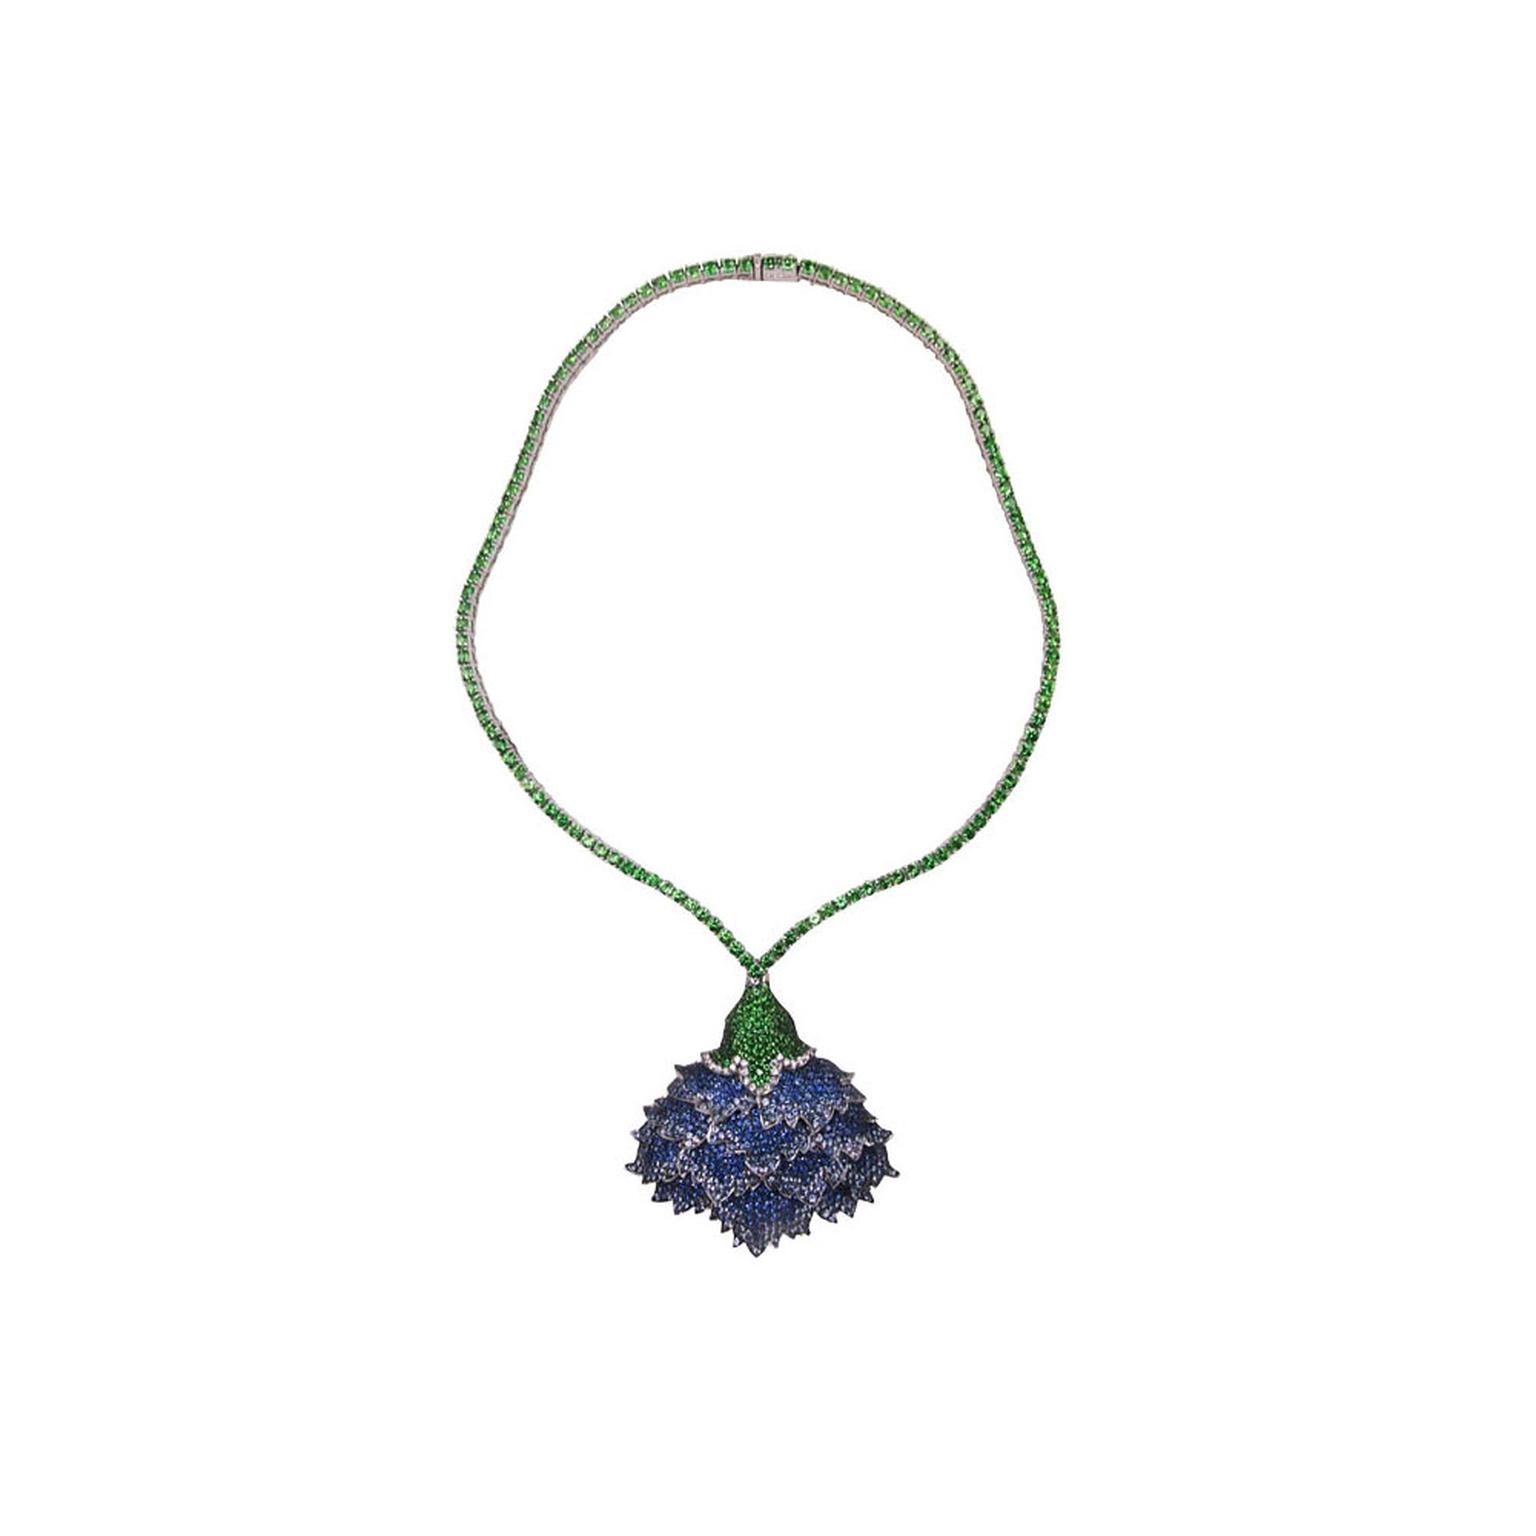 Nisan Ongwuthitham for Plukka white gold, titanium and sapphire lotus necklace